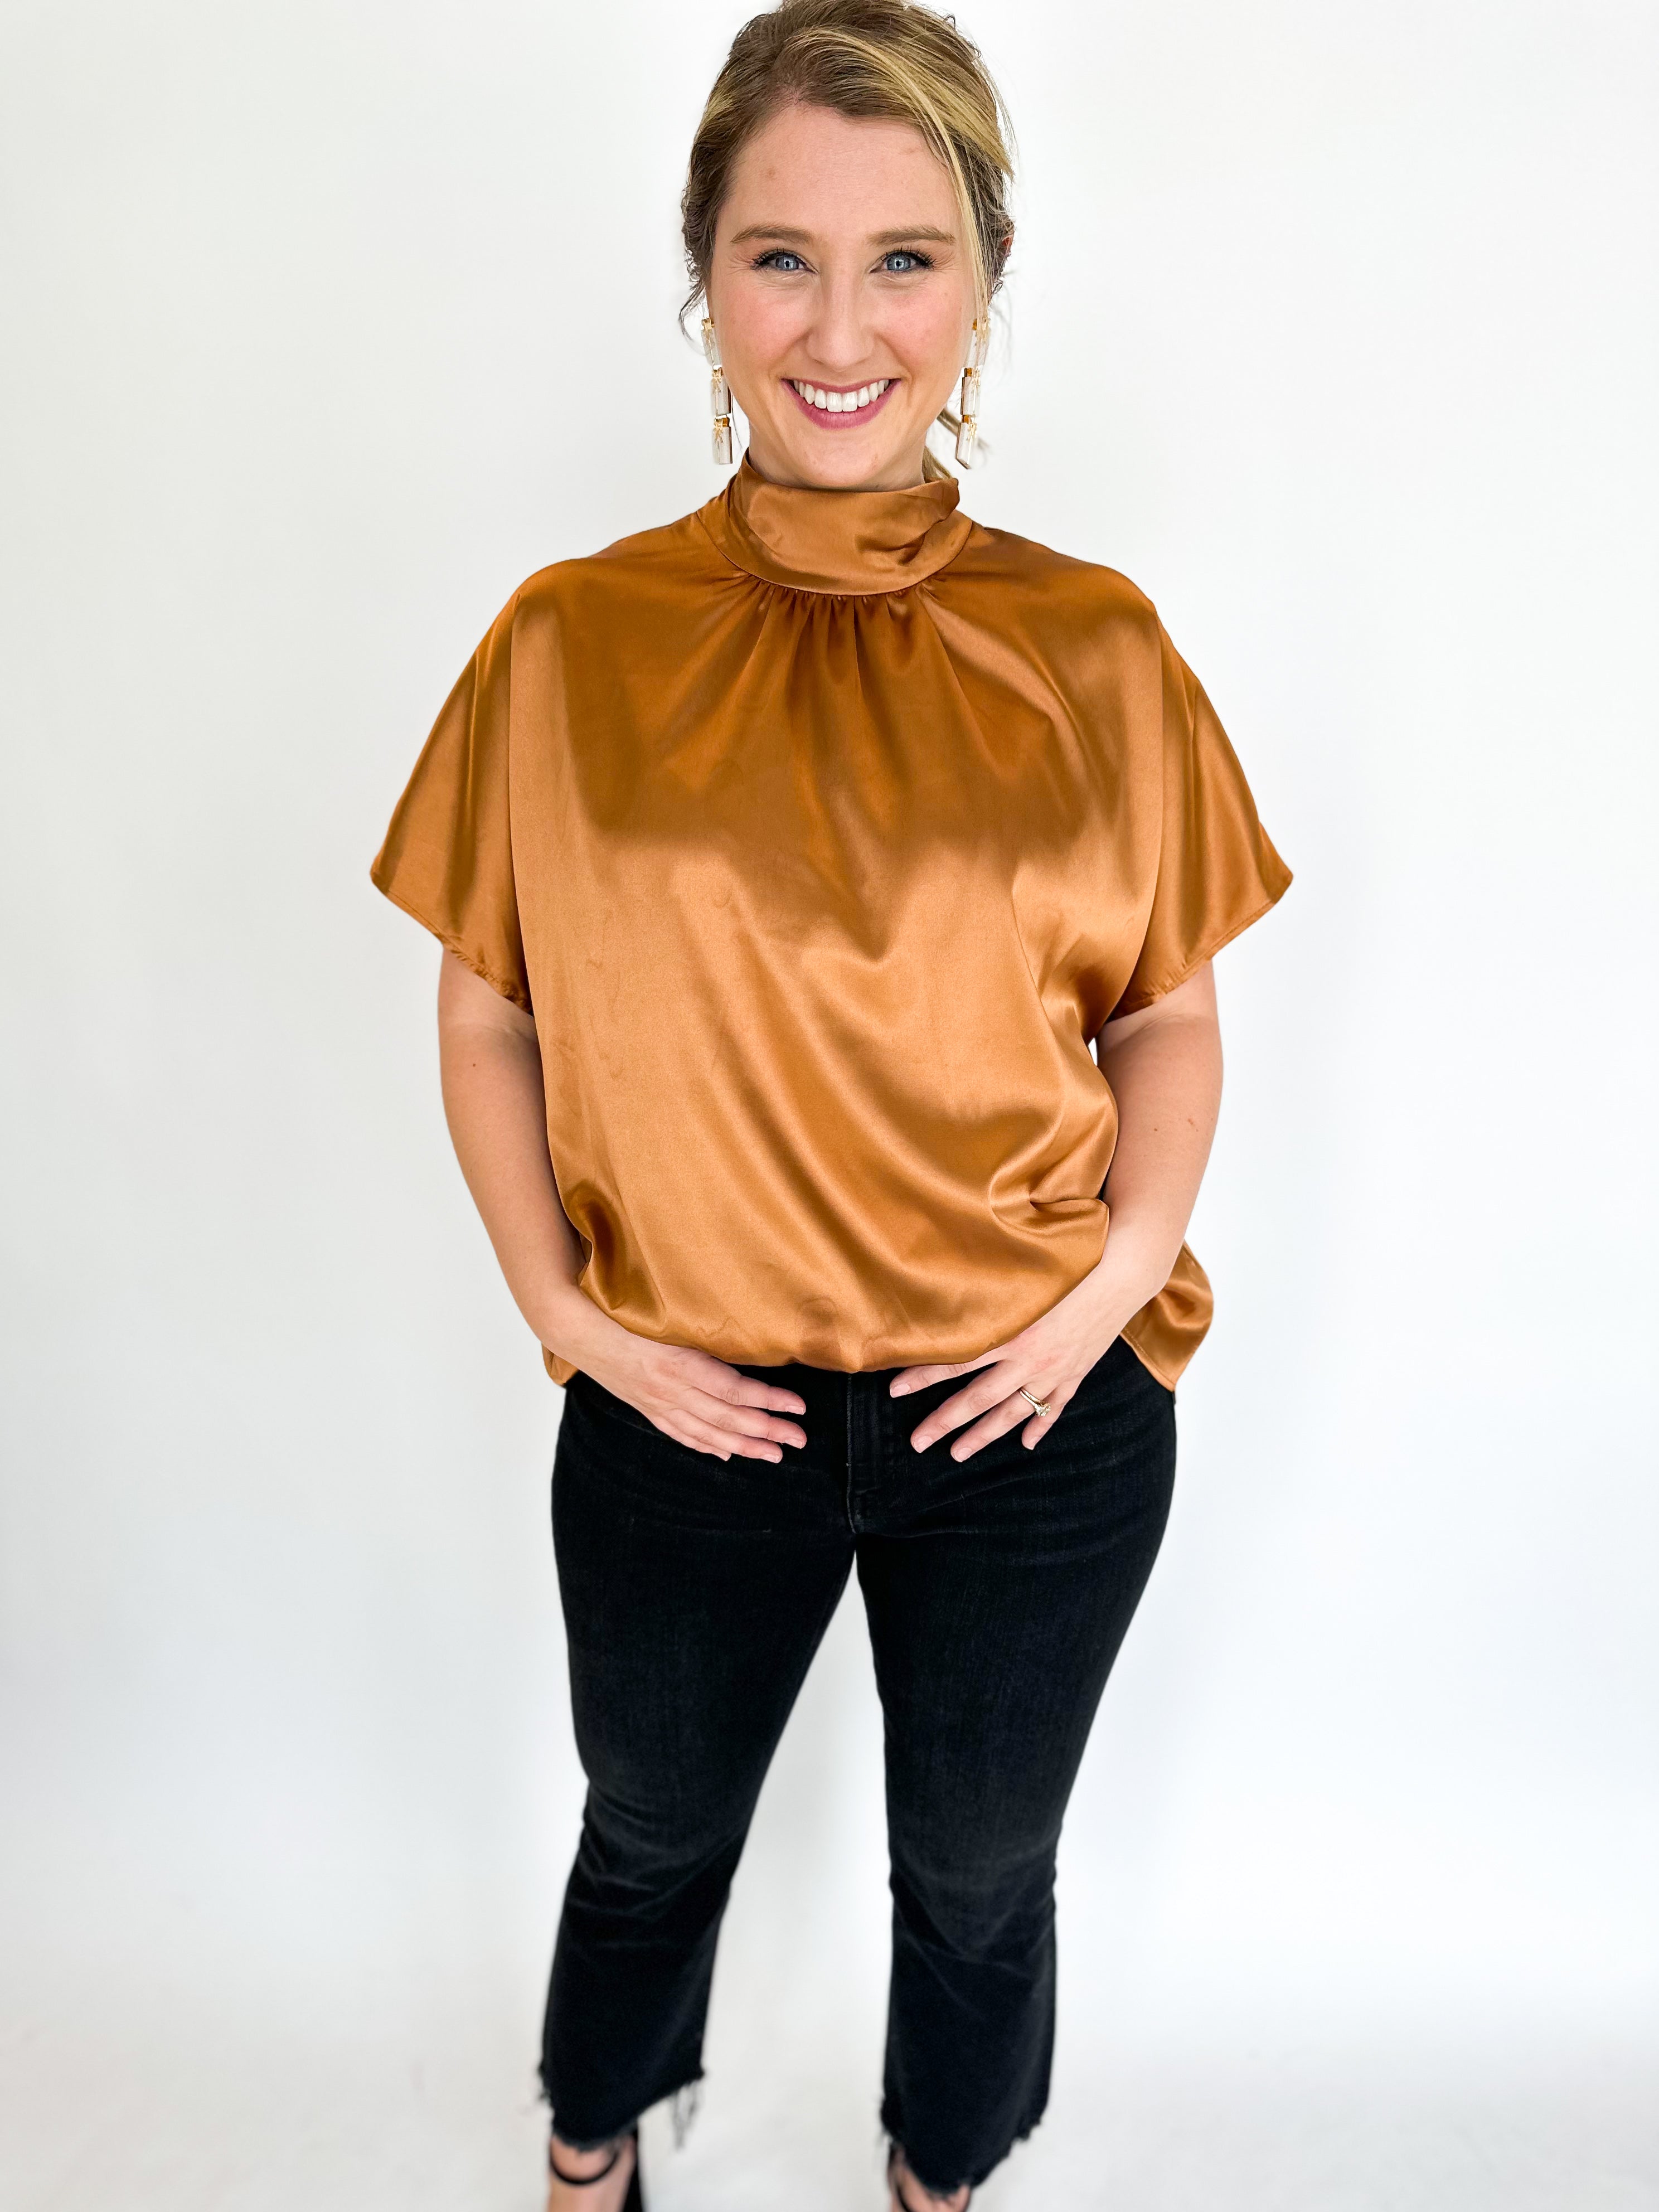 Charming Satin Blouse - Golden-200 Fashion Blouses-ADRIENNE-July & June Women's Fashion Boutique Located in San Antonio, Texas